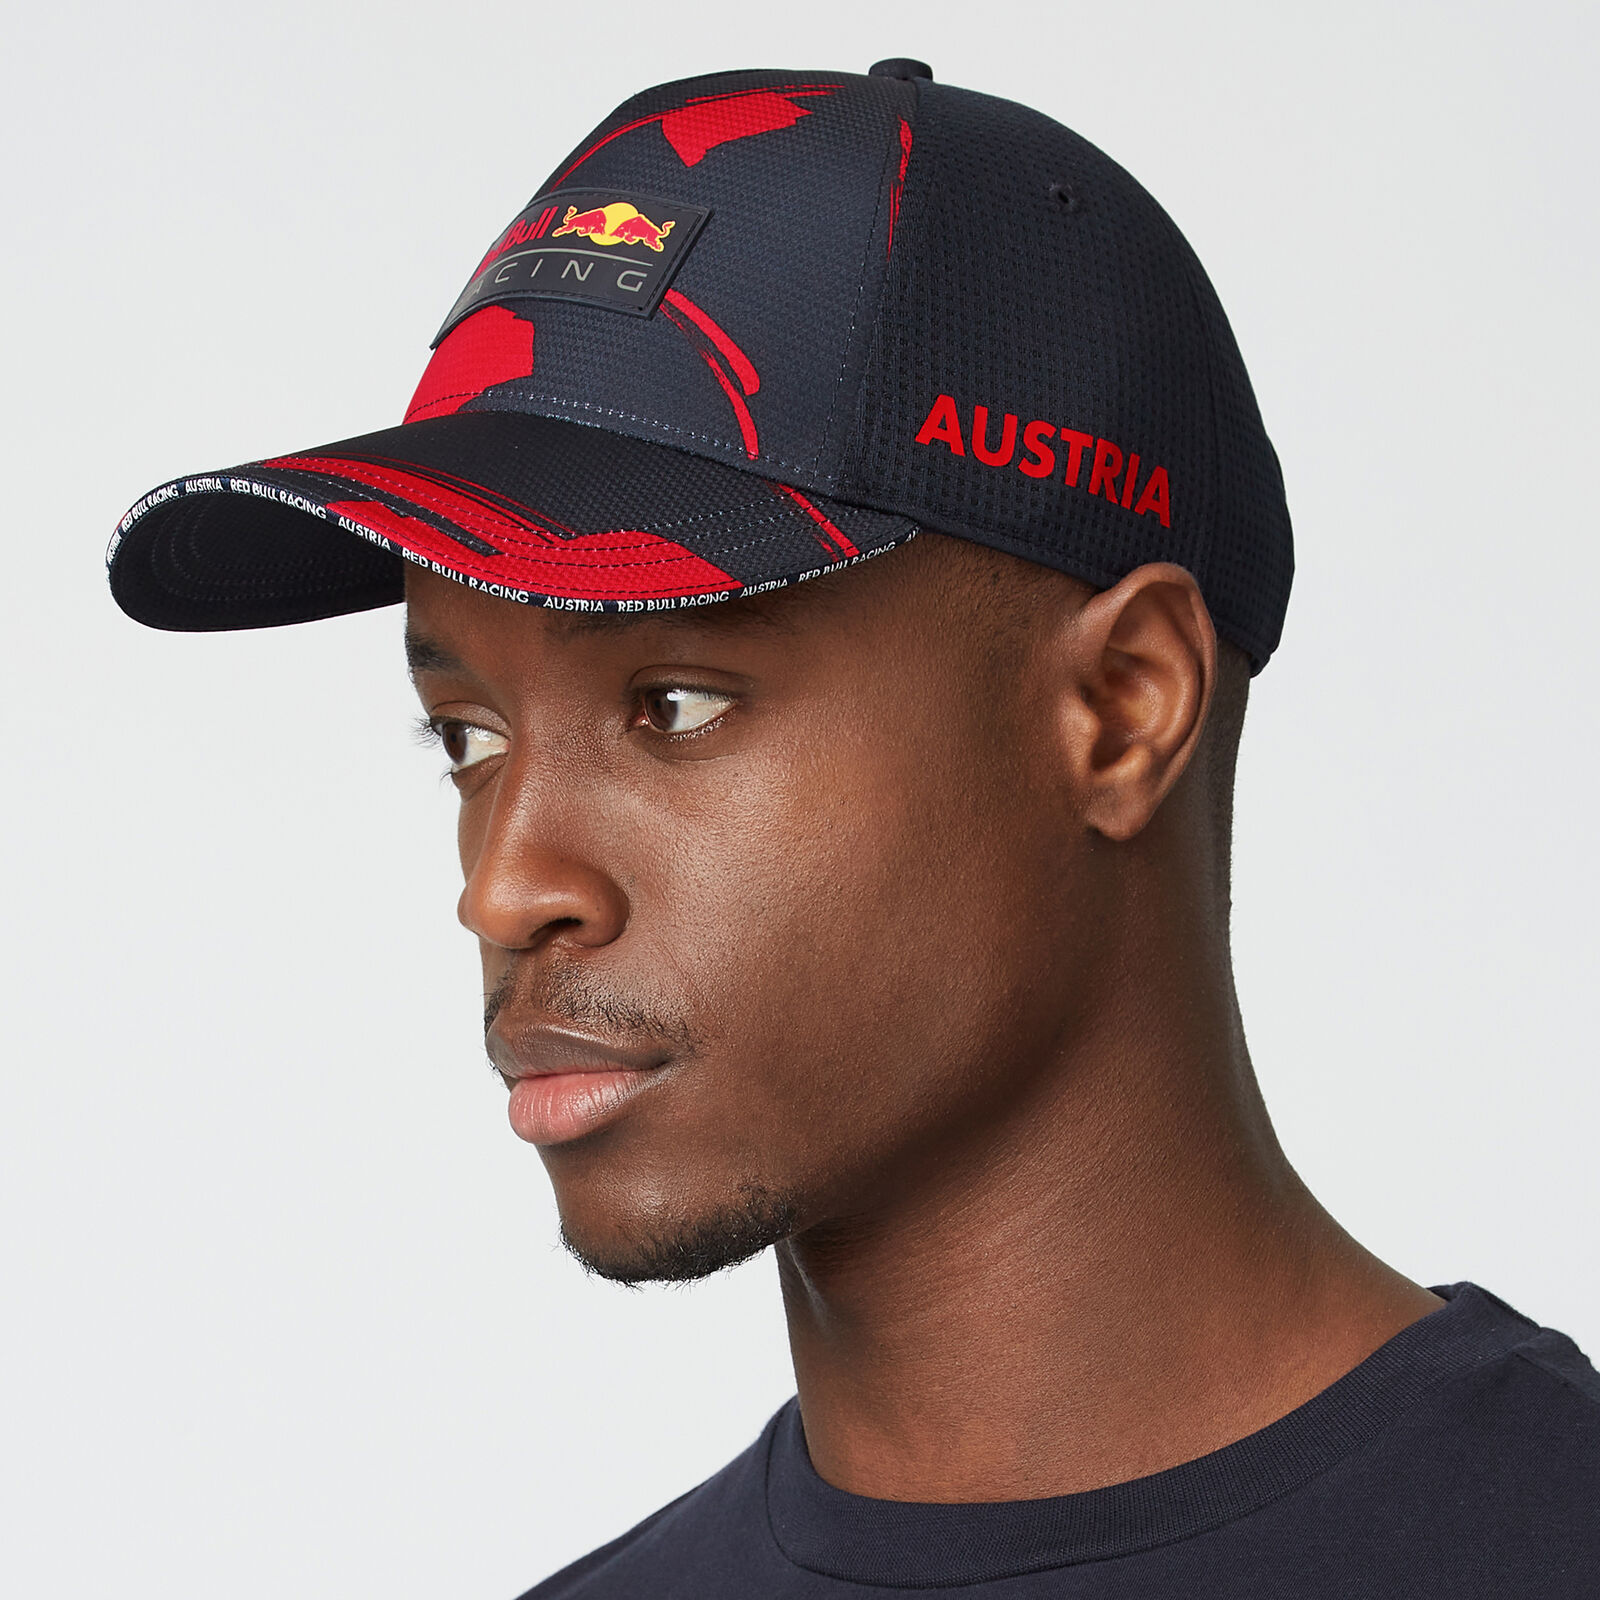 Curved brim cap of the Red Bull team in the 2022 season